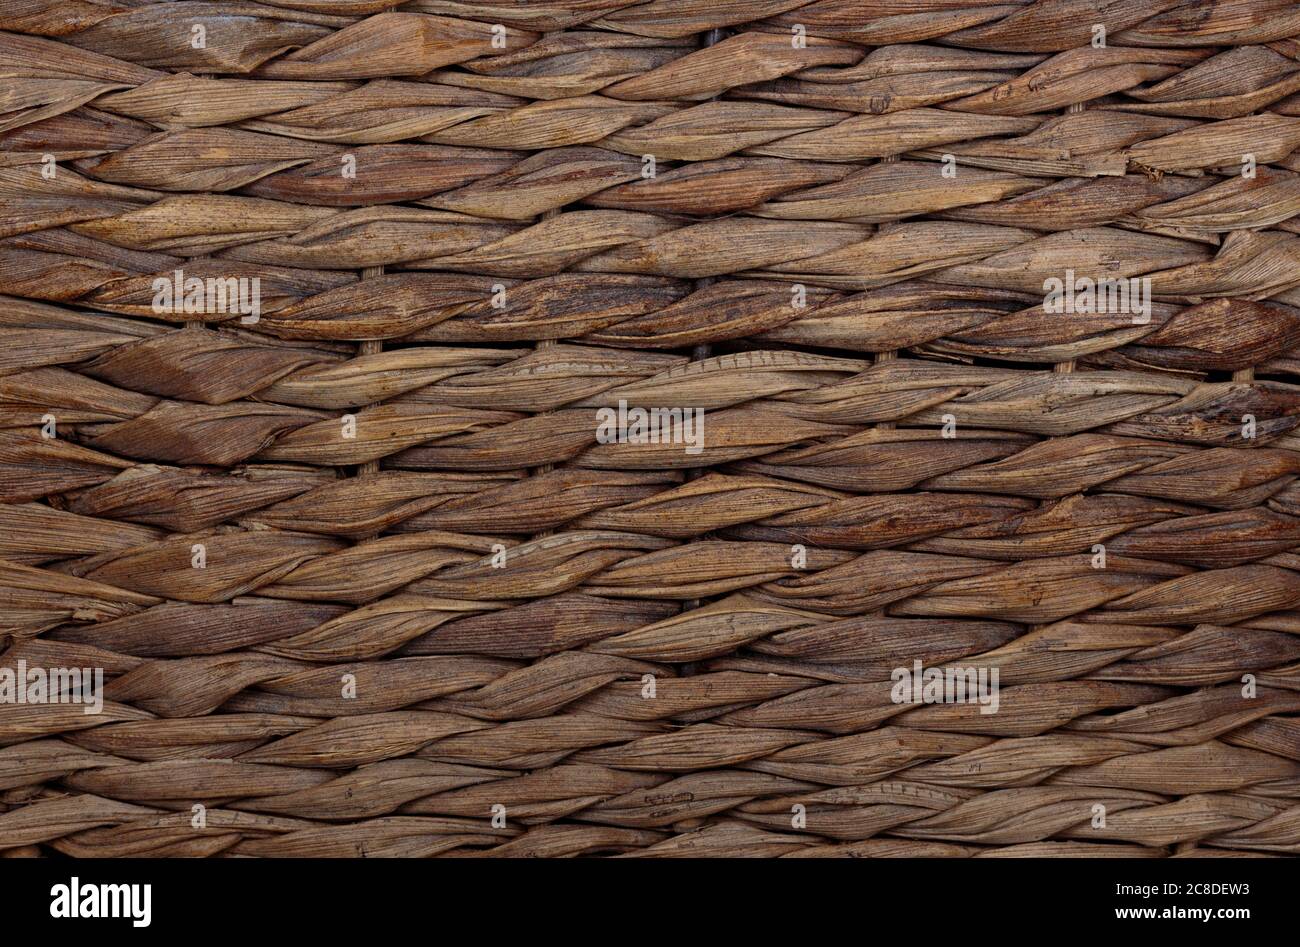 macro shot of a flat, rustic, wicker basket weave texture in a horizontal direction in brown, earth colors for use as a background or for compositing Stock Photo